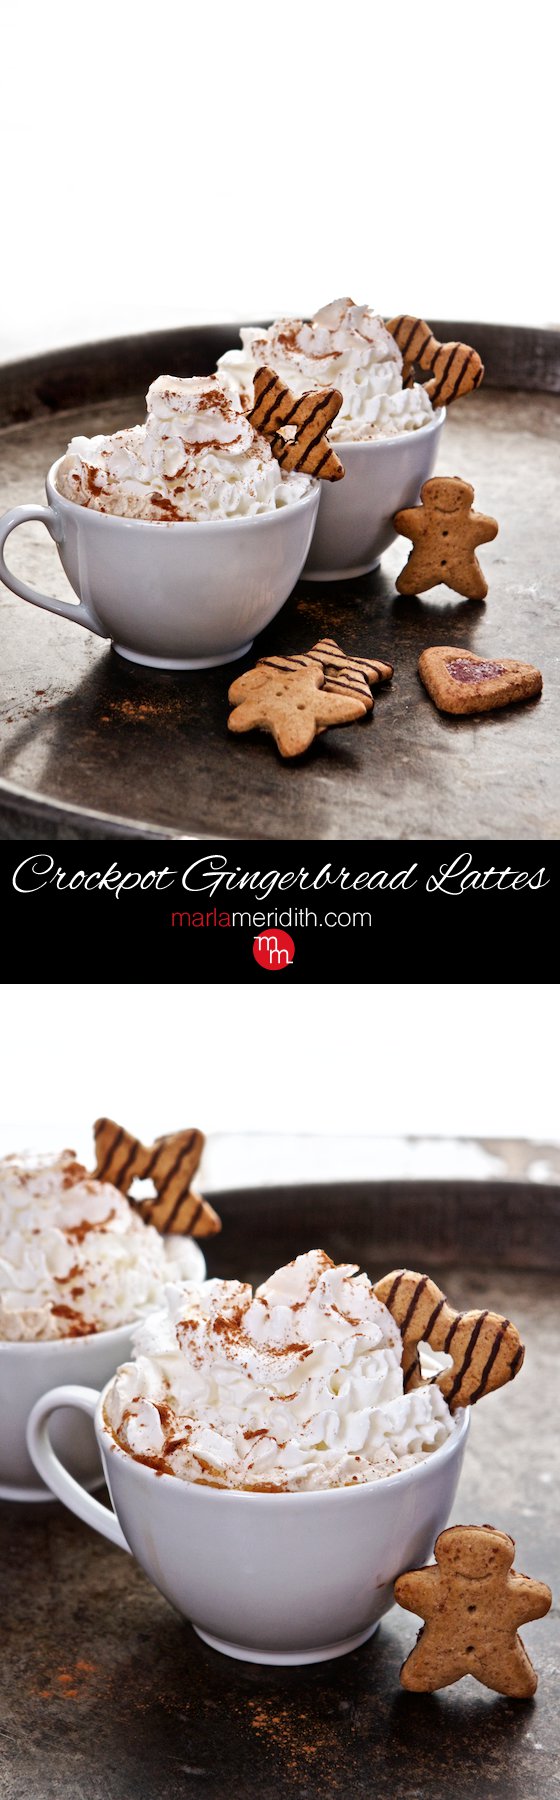 Crockpot Gingerbread Lattes Recipe, will warm you up on the chilliest days. Spike with rum or whiskey for happy hour! MarlaMeridith.com ( @marlameridith )